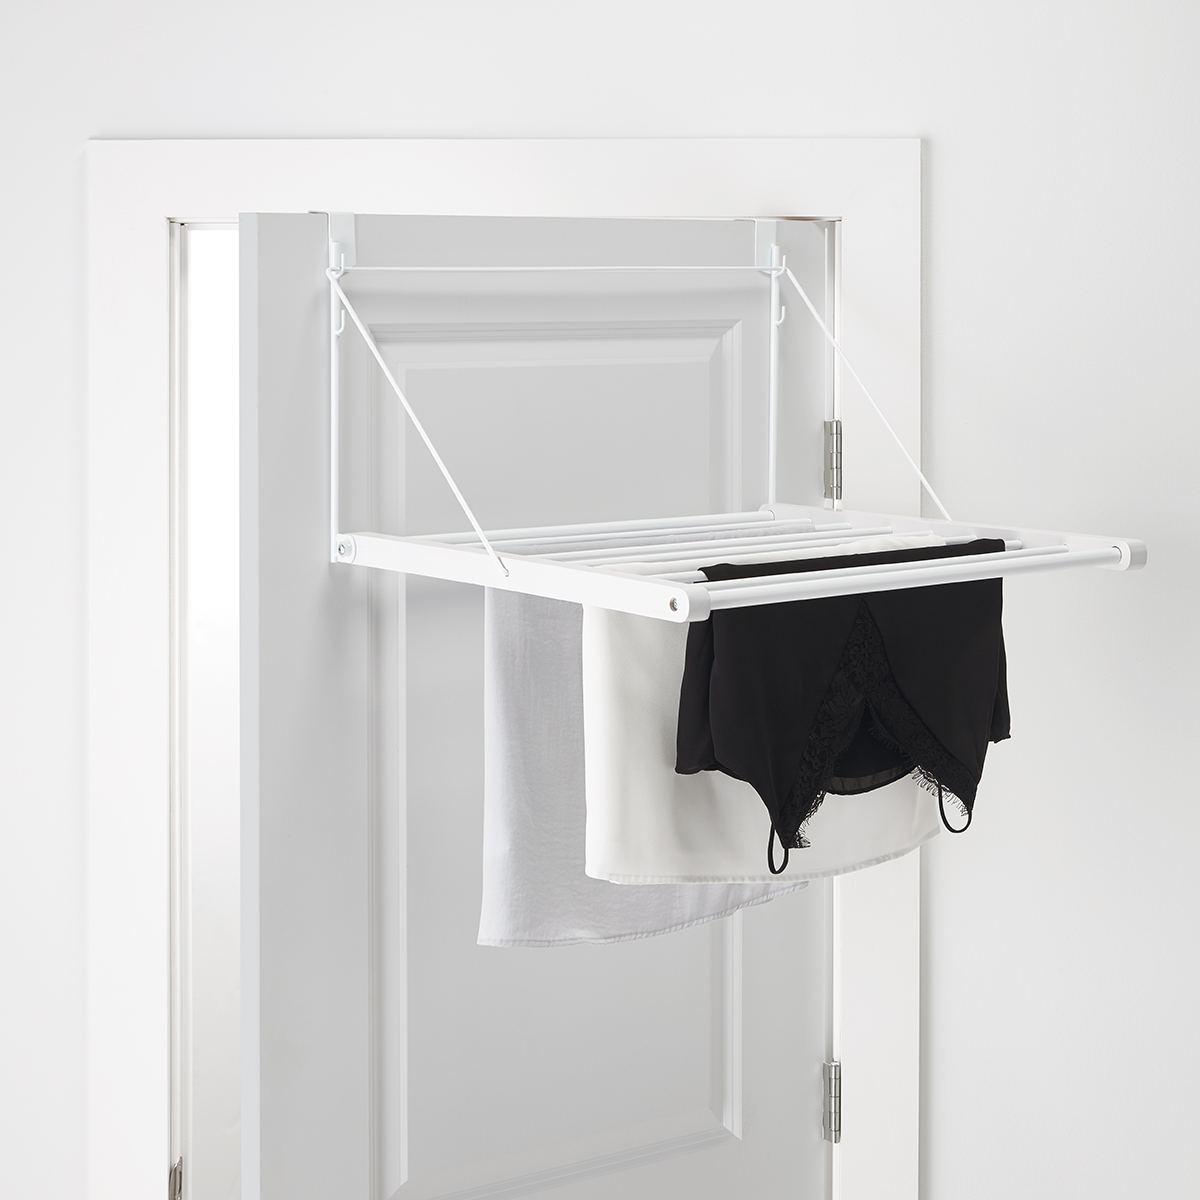 Wall Mount Over the Door Clothes Laundry Drying Rack Double Shelf Dryer Storage